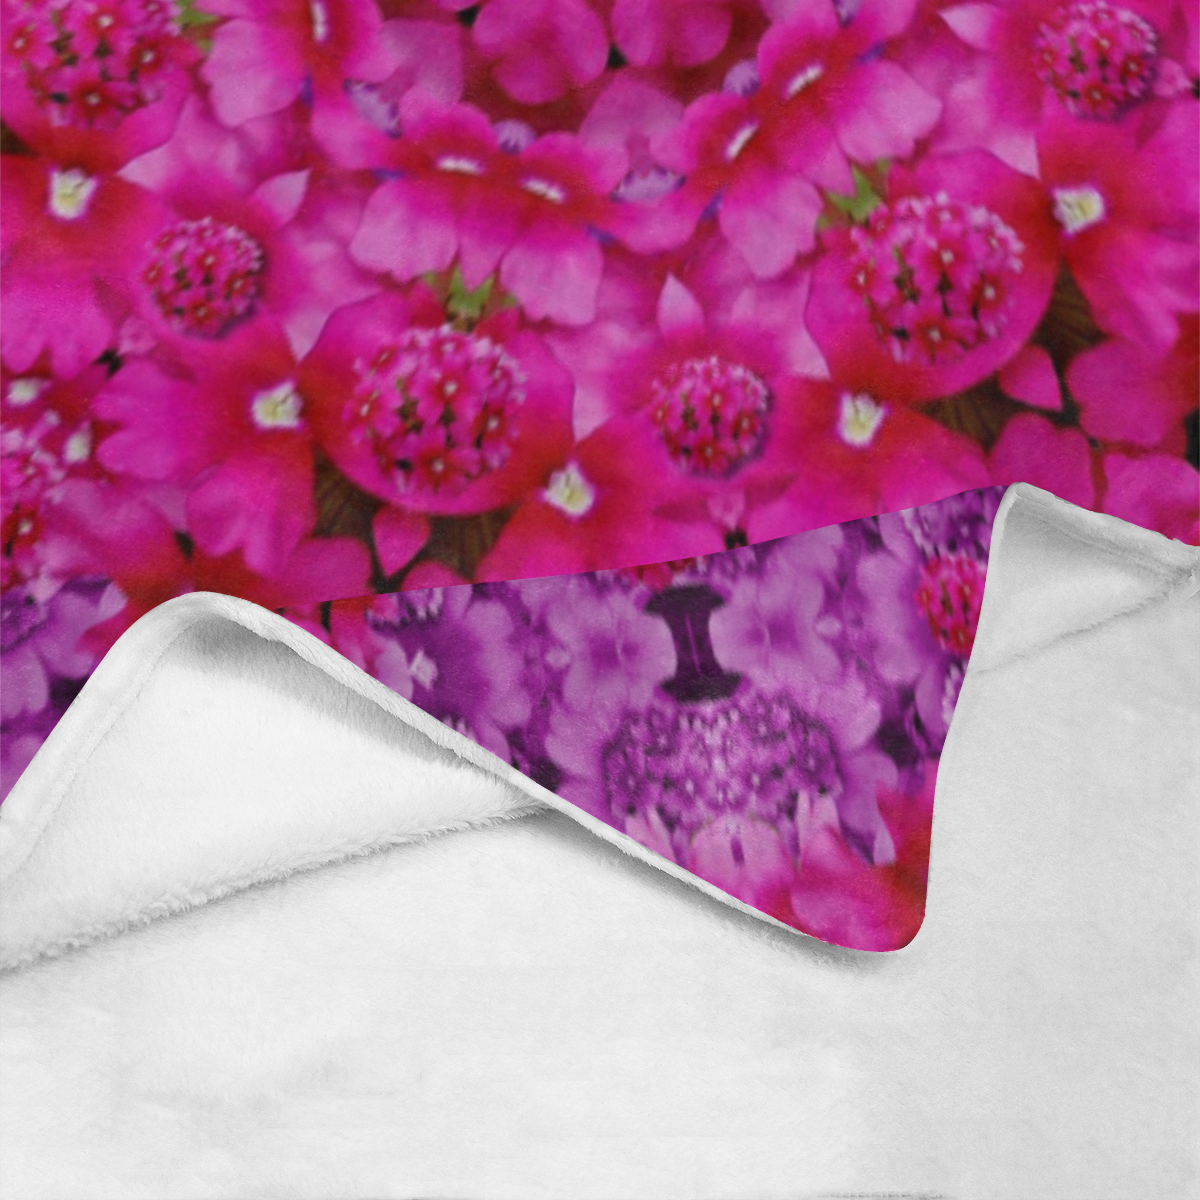 flower suprise to love and enjoy Ultra-Soft Micro Fleece Blanket 60"x80"